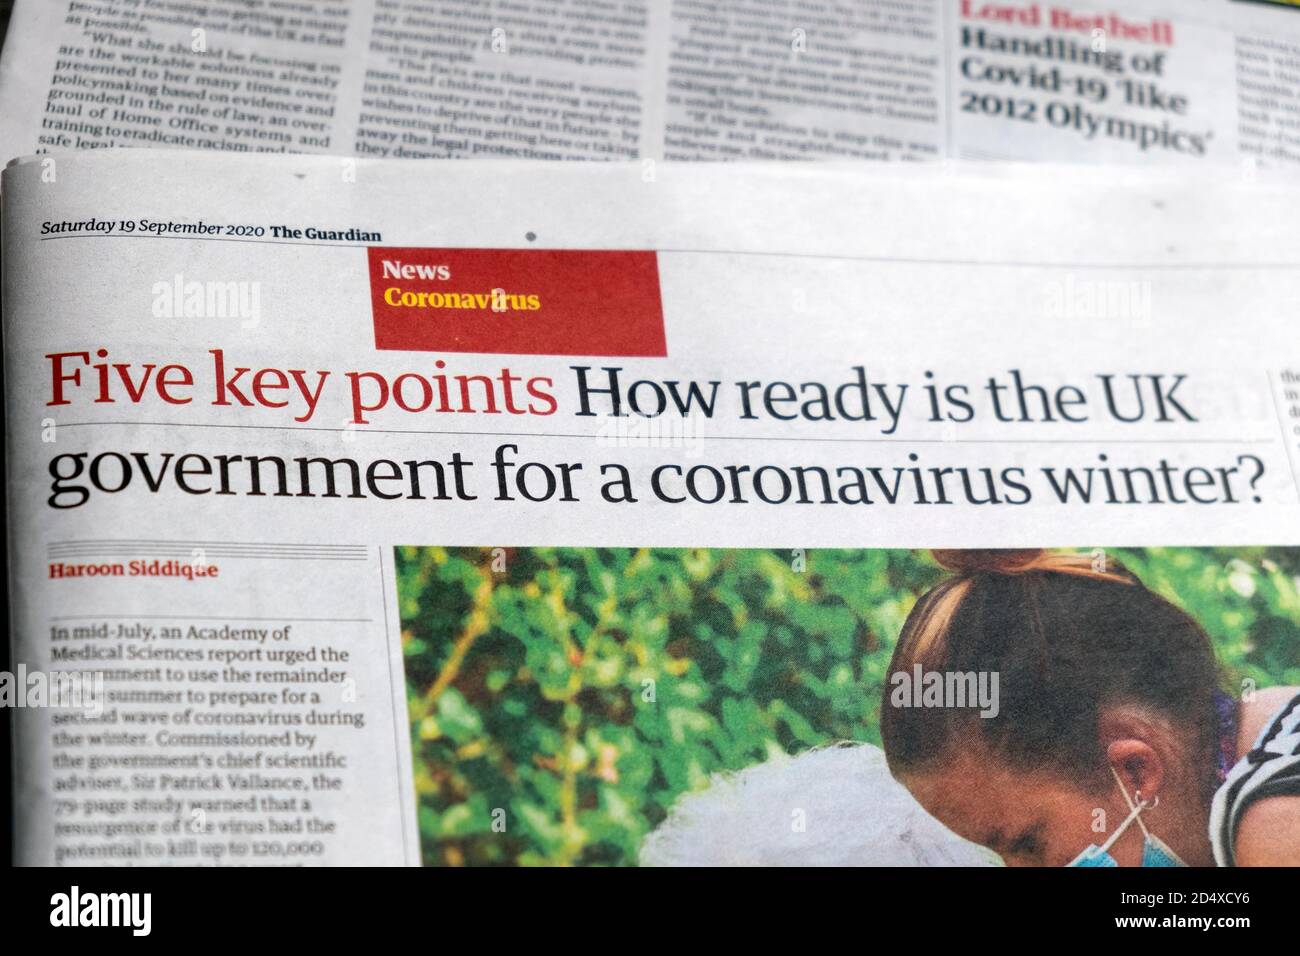 Covid 19 news newspaper headline in The Guardian 'How ready is the UK government for a coronavirus winter?' 19 September 2020 London England UK Stock Photo